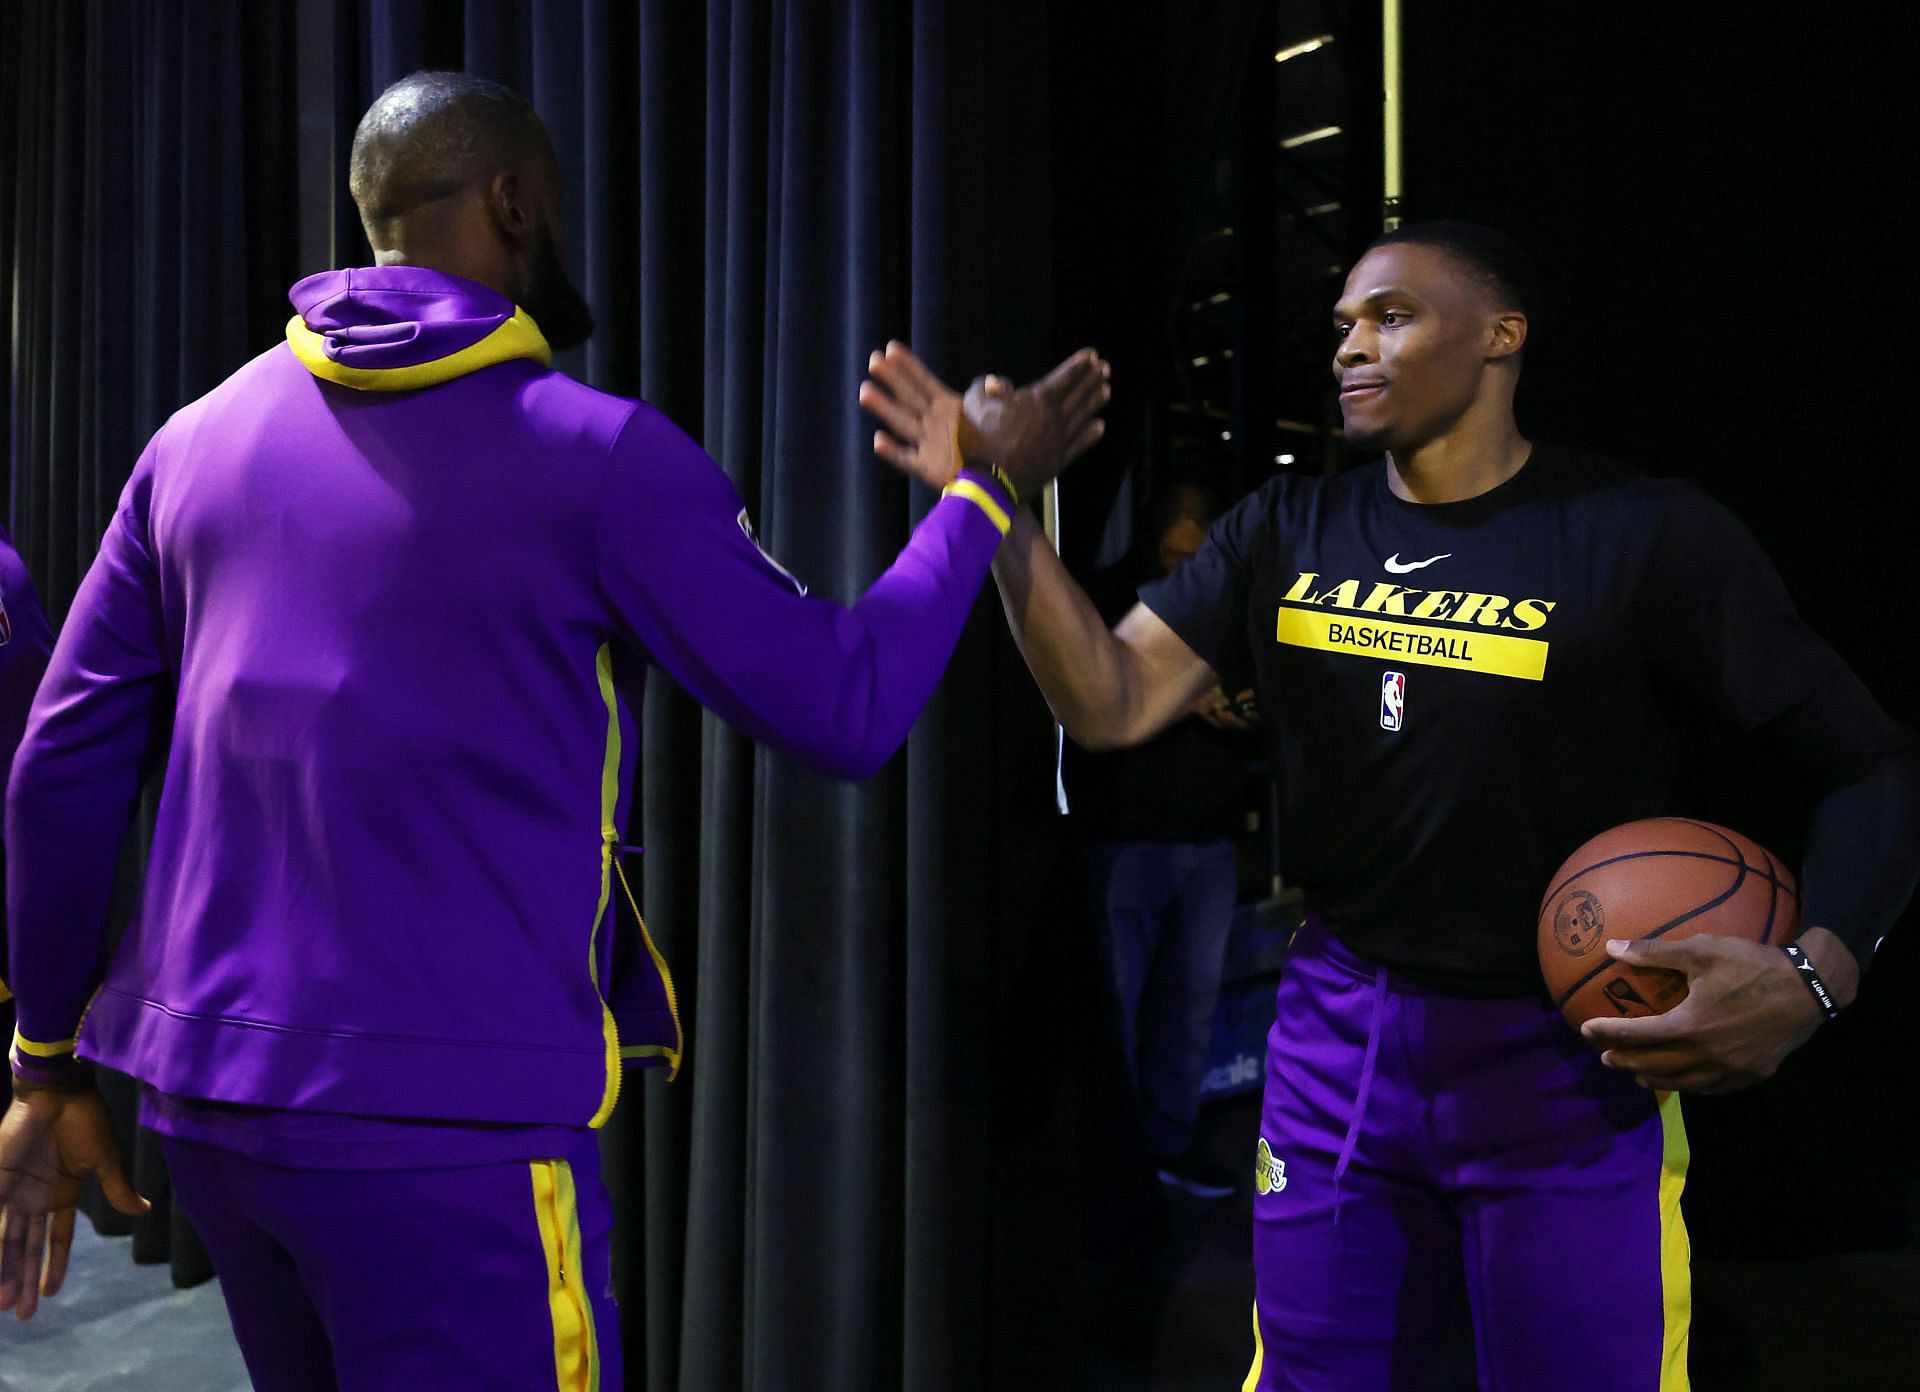 Russell Westbrook, right, of the LA Lakers greets LeBron James